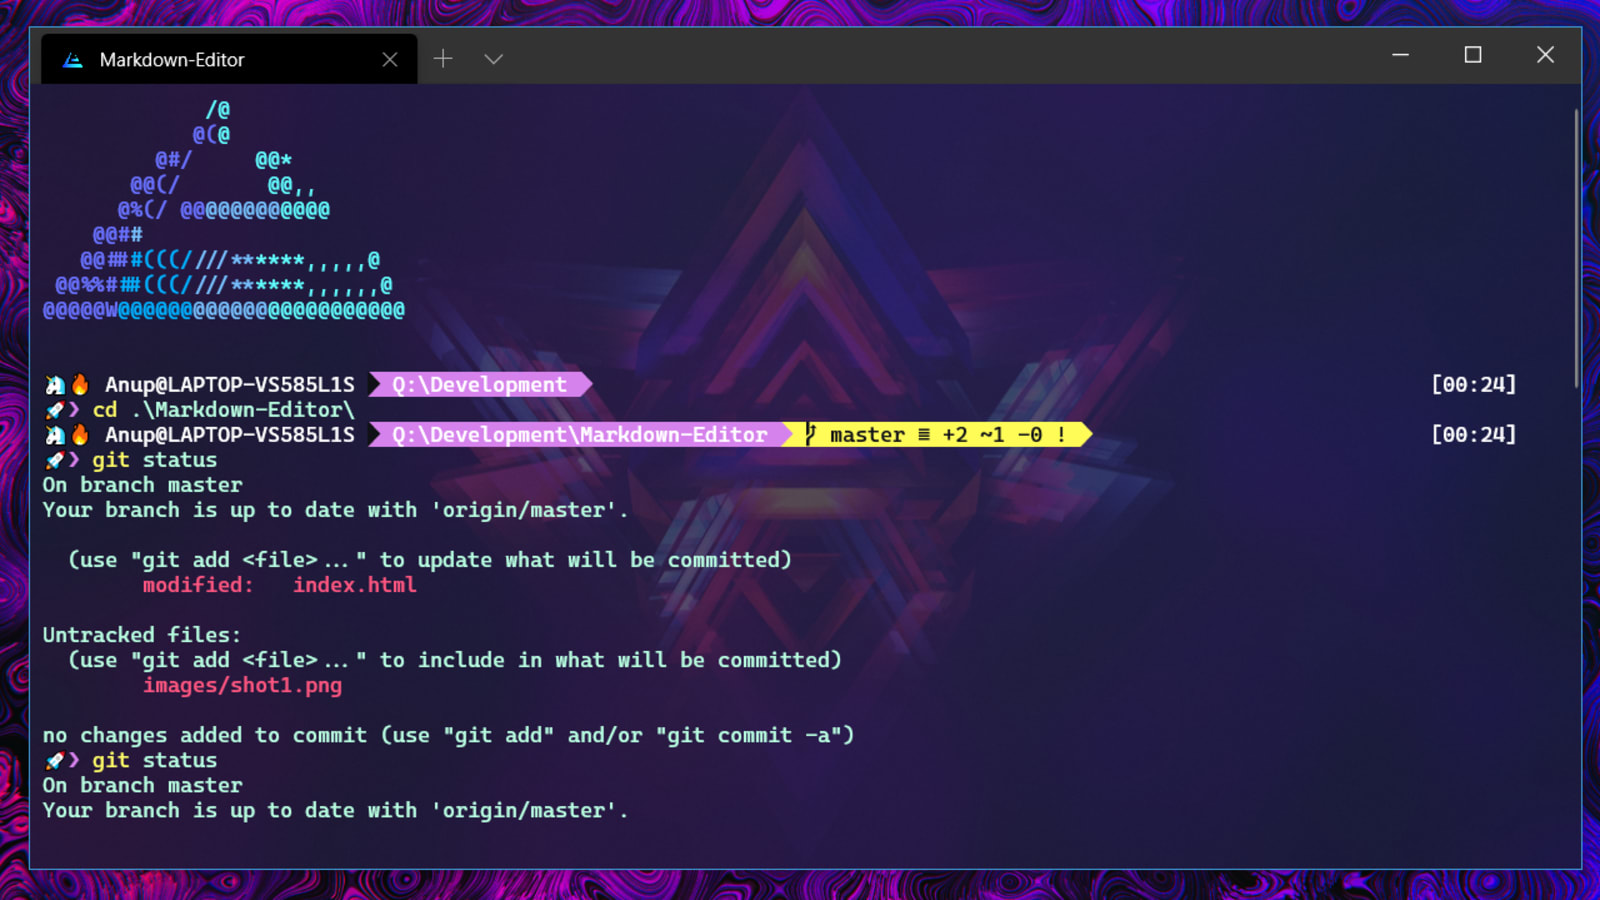 cool background image for mac os x terminal app